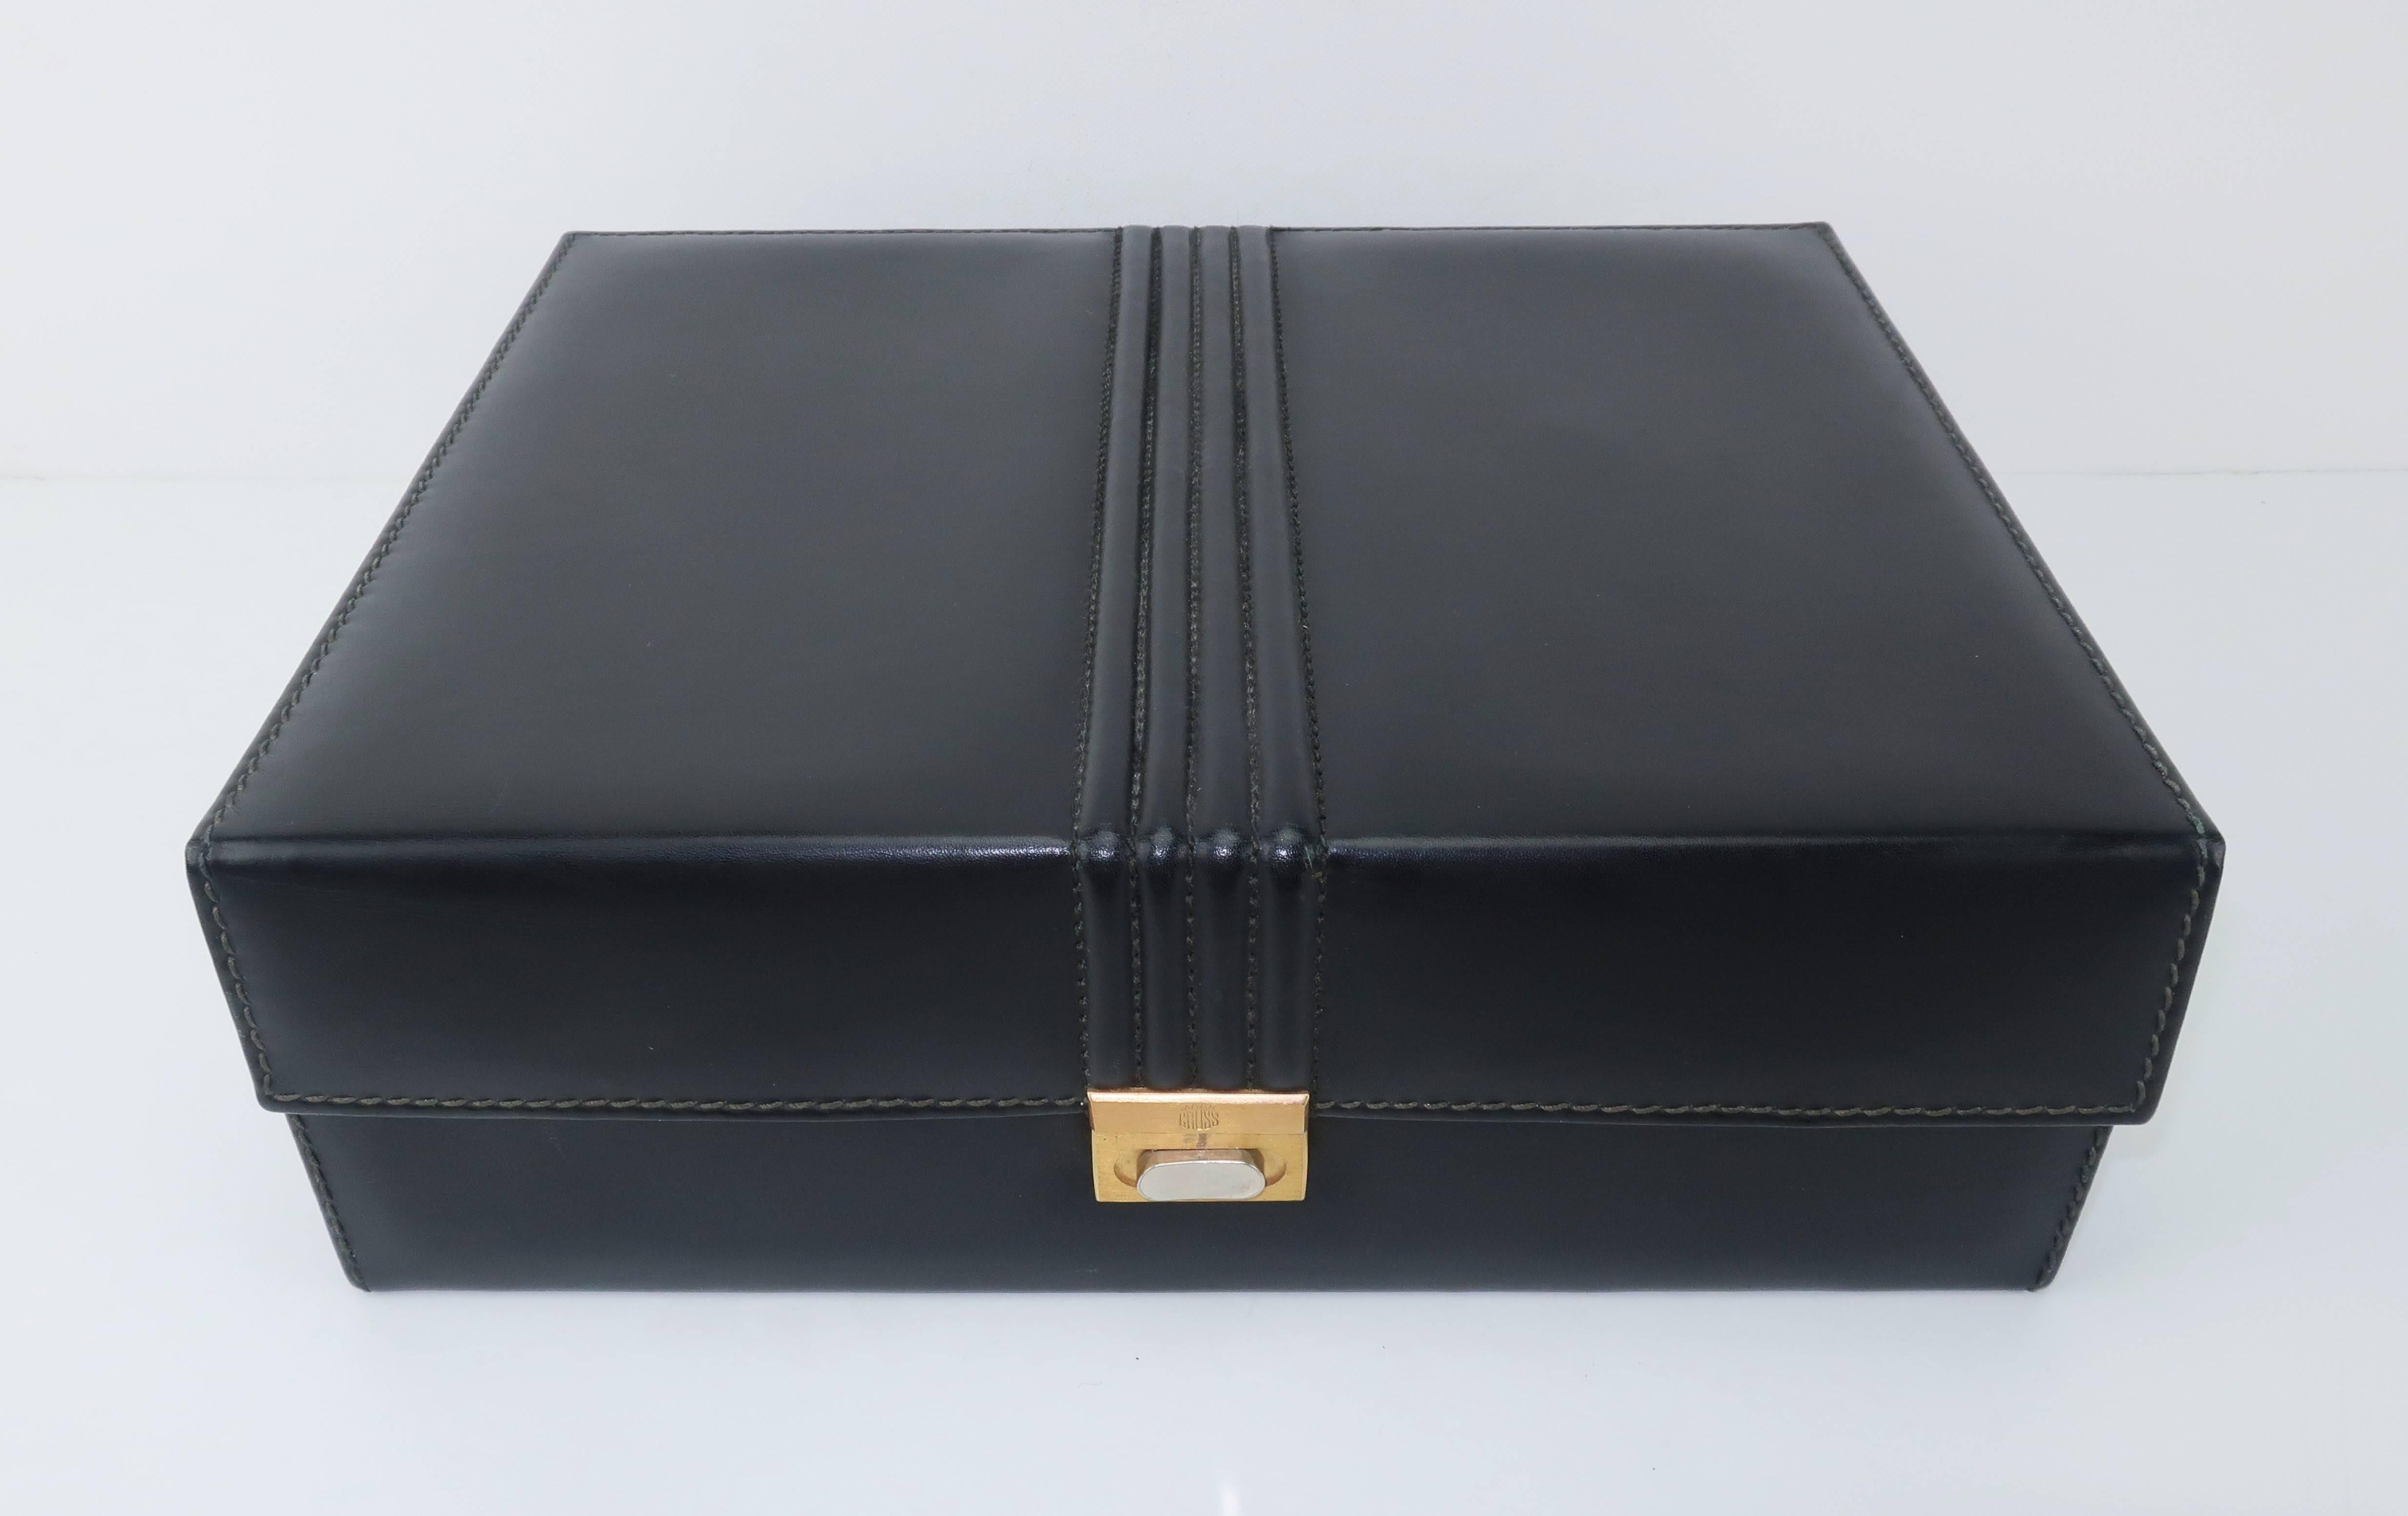 This handsome Mark Cross jewelry box is suitable for a man or woman and is practical for storage in a drawer or on a shelf.  The black leather case is channeled across the top with a fold over front which features a brushed metal push button